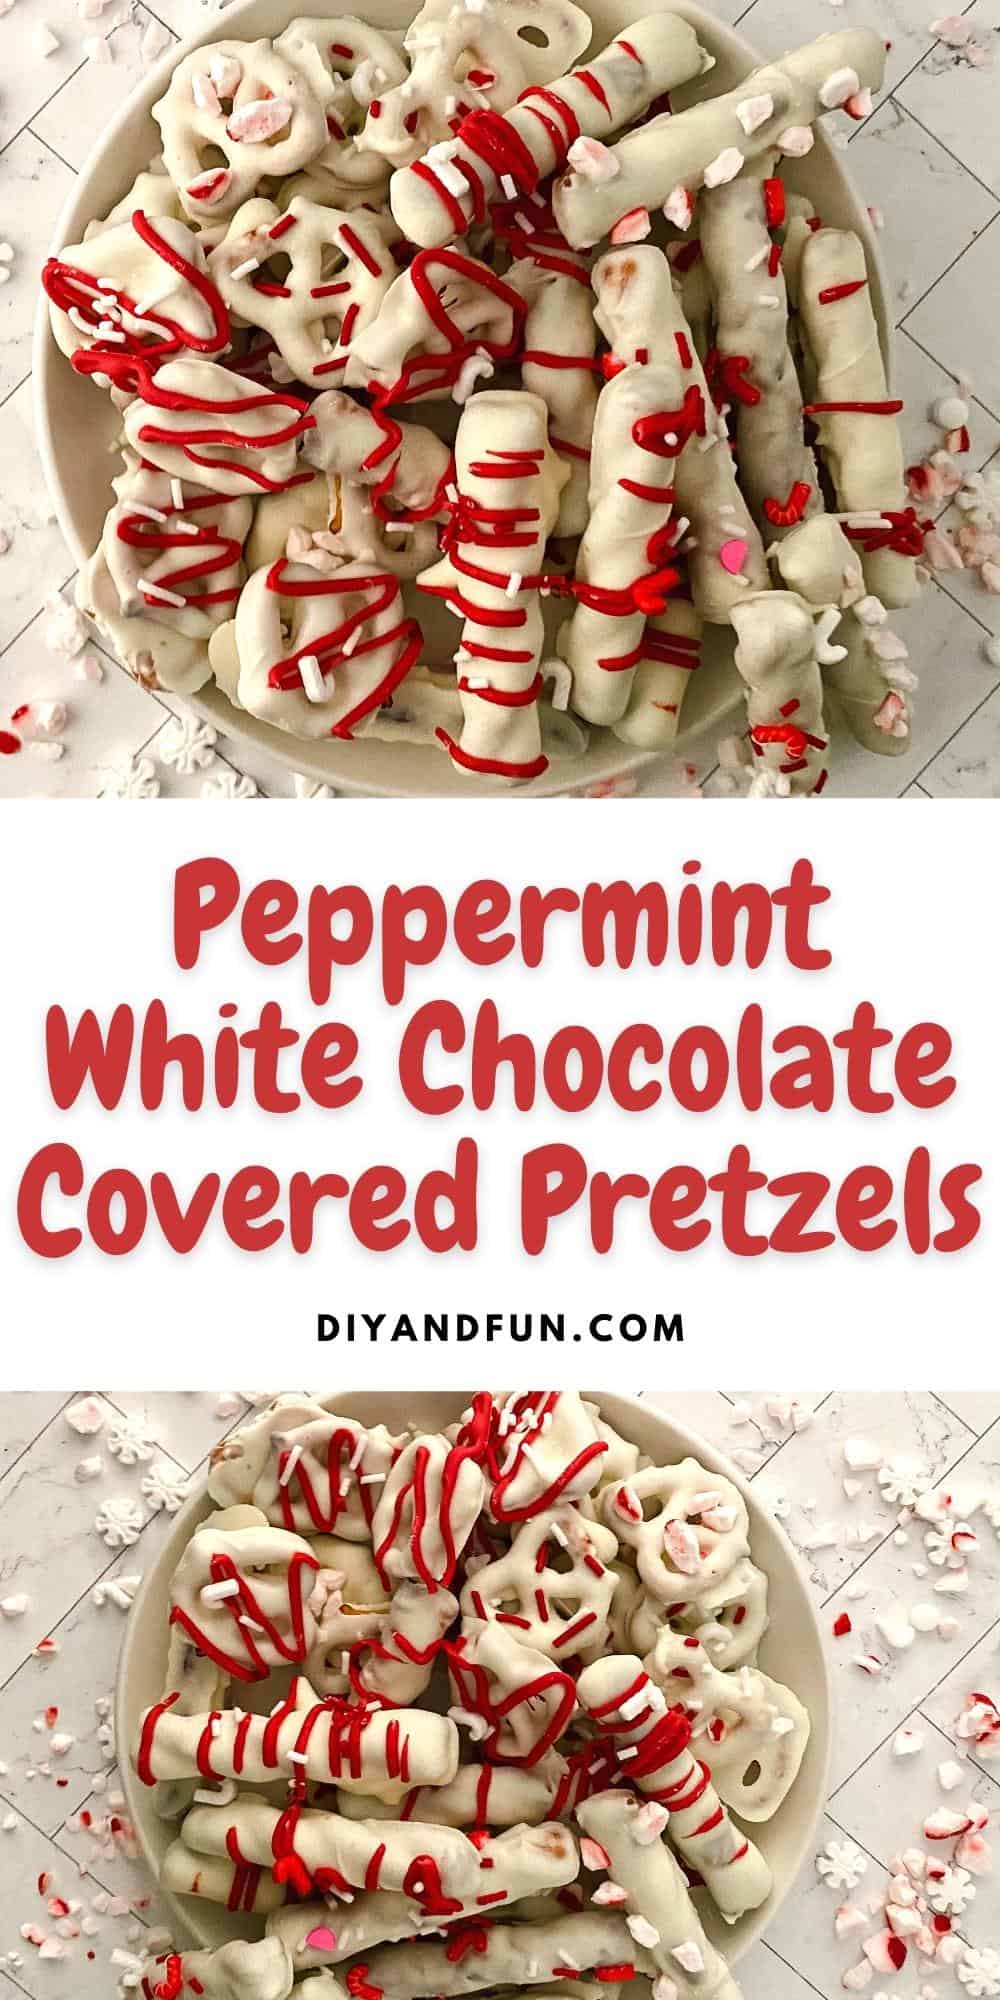 Peppermint White Chocolate Covered Pretzels, a refreshing and tasty snack idea for chocolate covered pretzels. Valentines day, holidays.